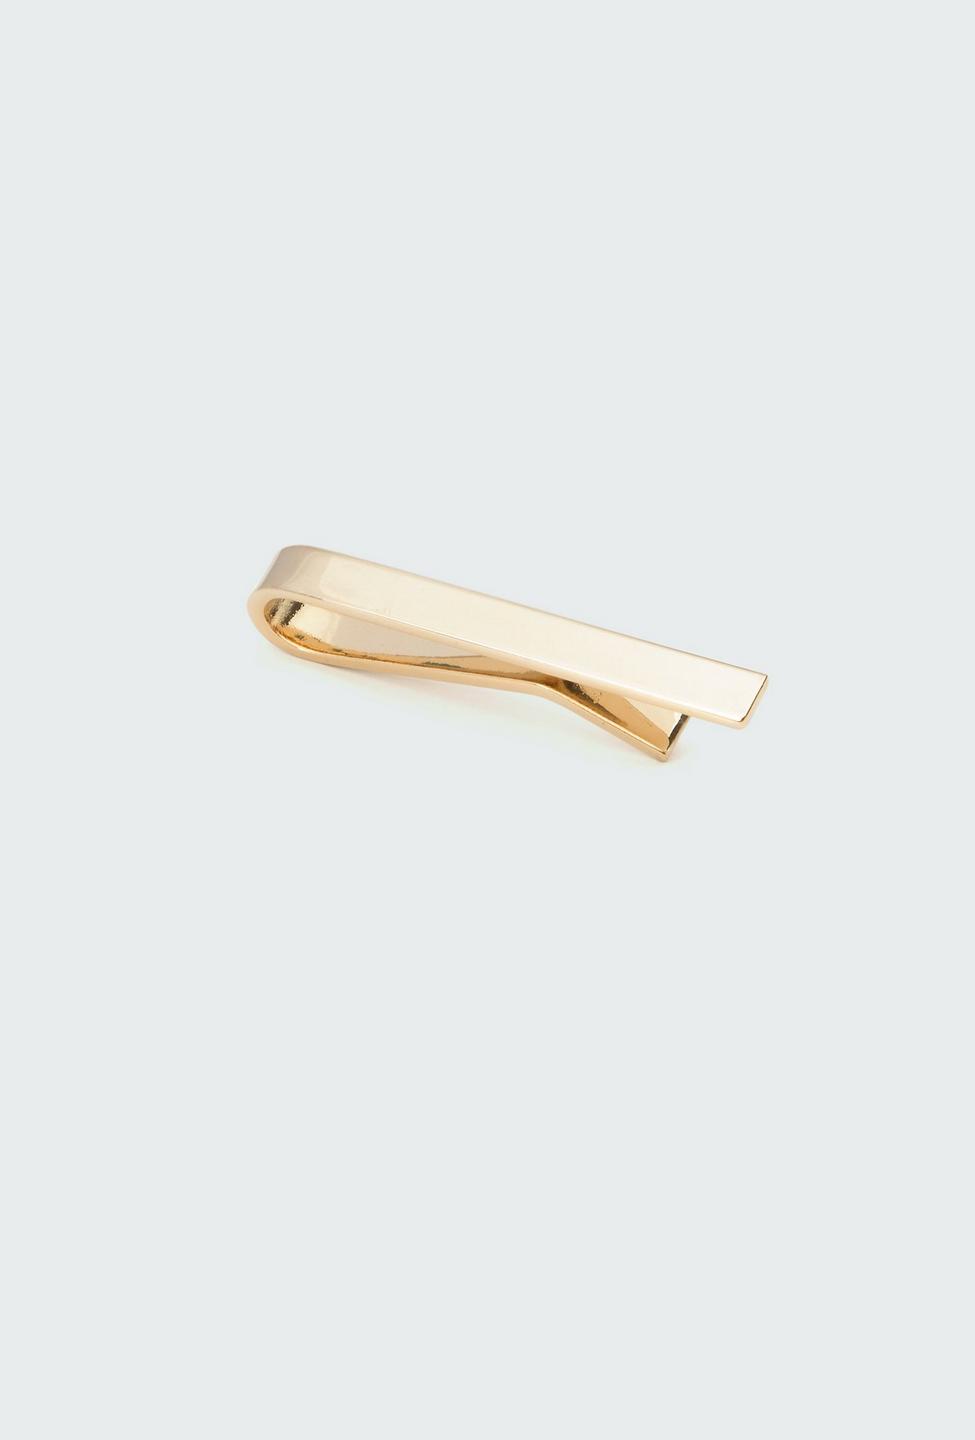 Gold tie clip - from Indochino Collection